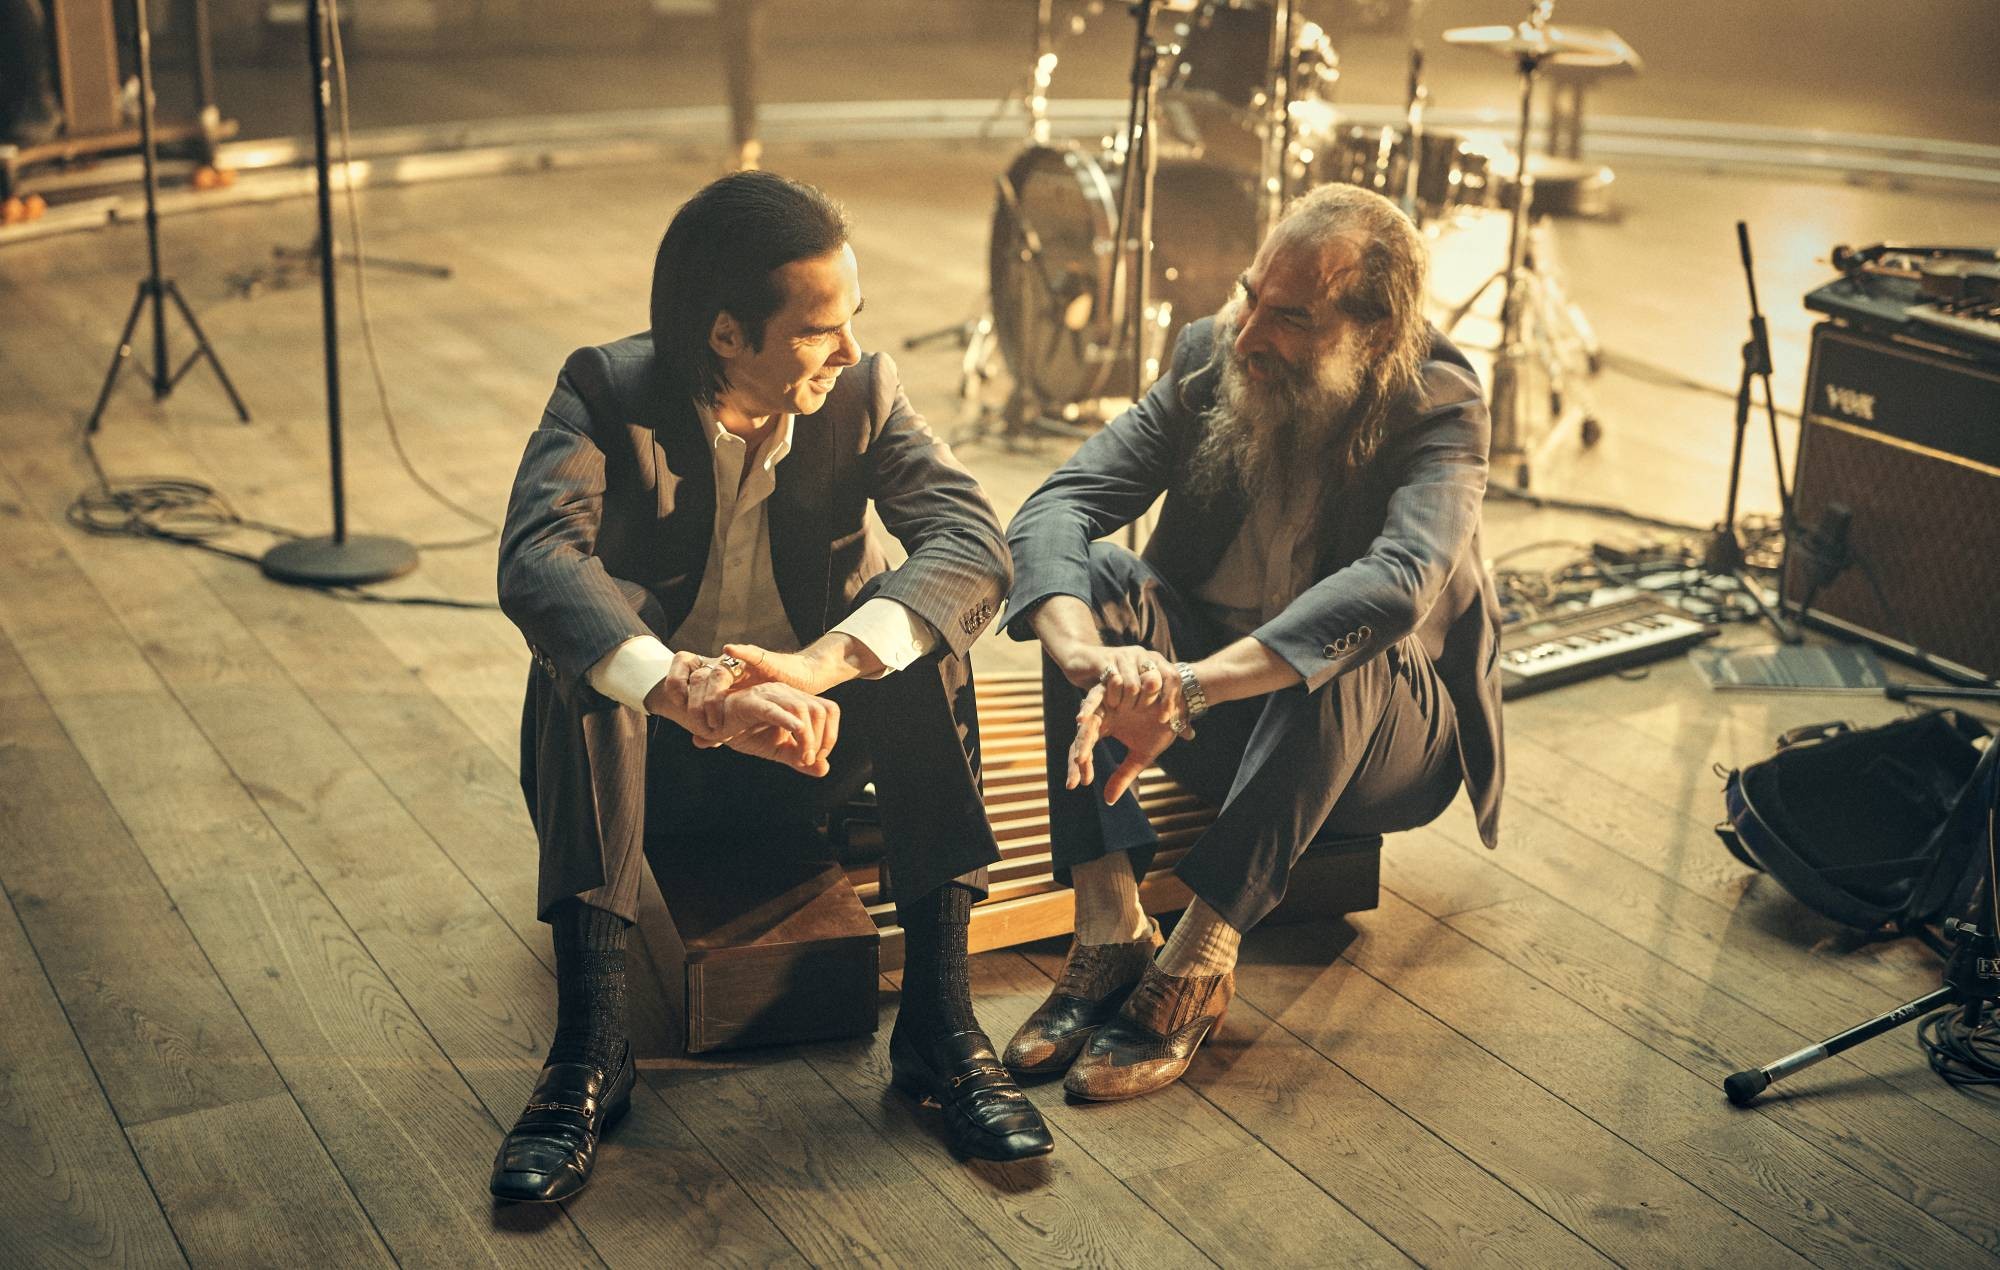 nick-cave-and-warren-ellis-by-charlie-gray-1-4pFq6.jpg